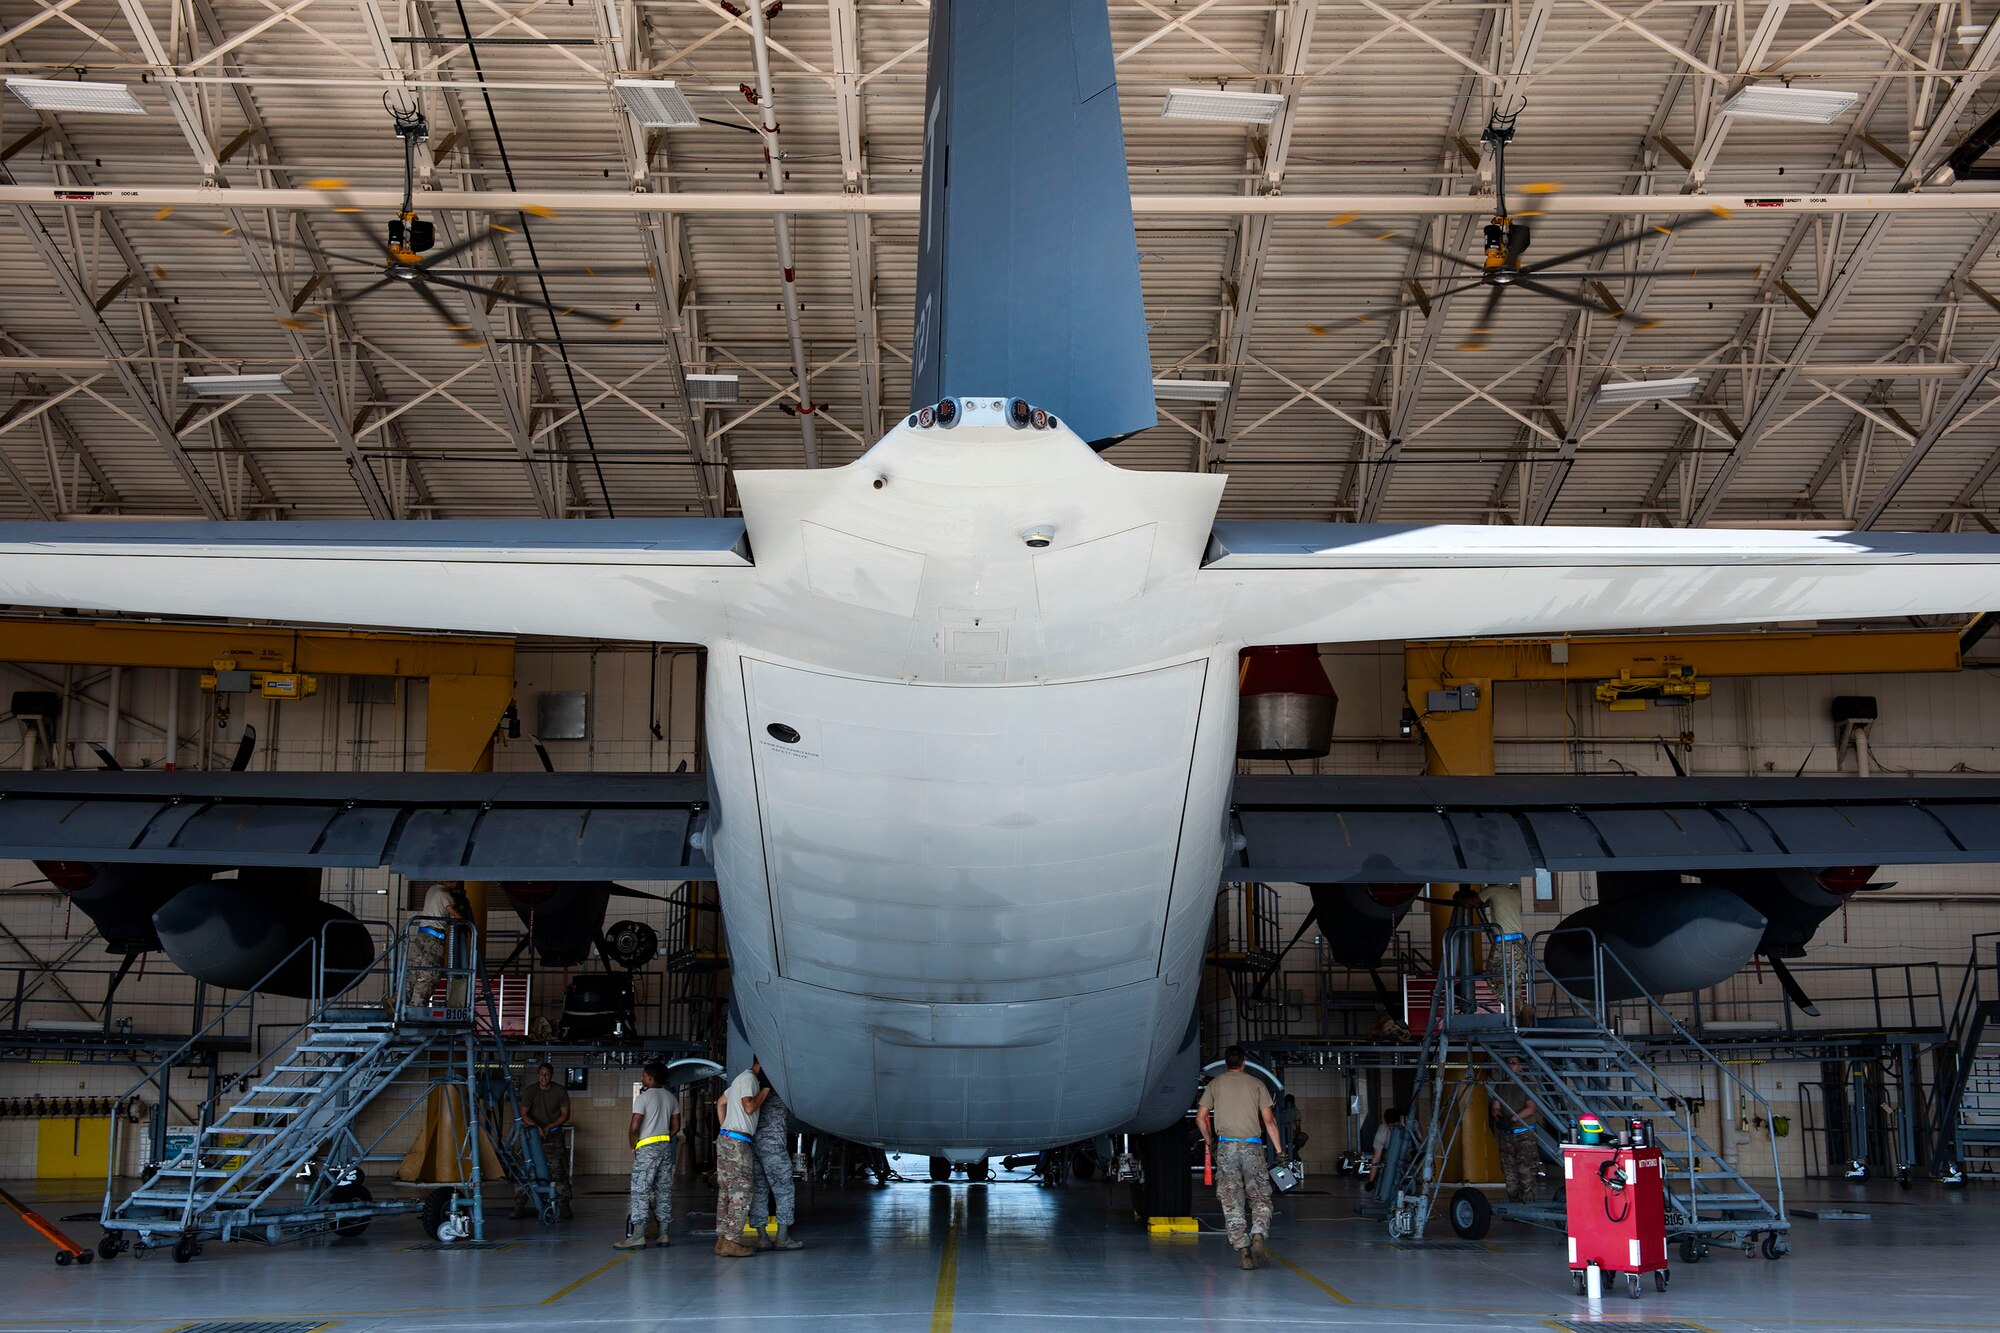 Airmen with the 71st Aircraft Maintenance Unit prepare an HC-130J Combat King II for a situational awareness communication upgrade (SACU) modification Sept. 25, 2019, at Moody Air Force Base, Ga. This SACU will enhance the aircraft’s ability to communicate with personnel on the ground during search and rescue operations. (U.S. Air Force photo by Senior Airman Erick Requadt)